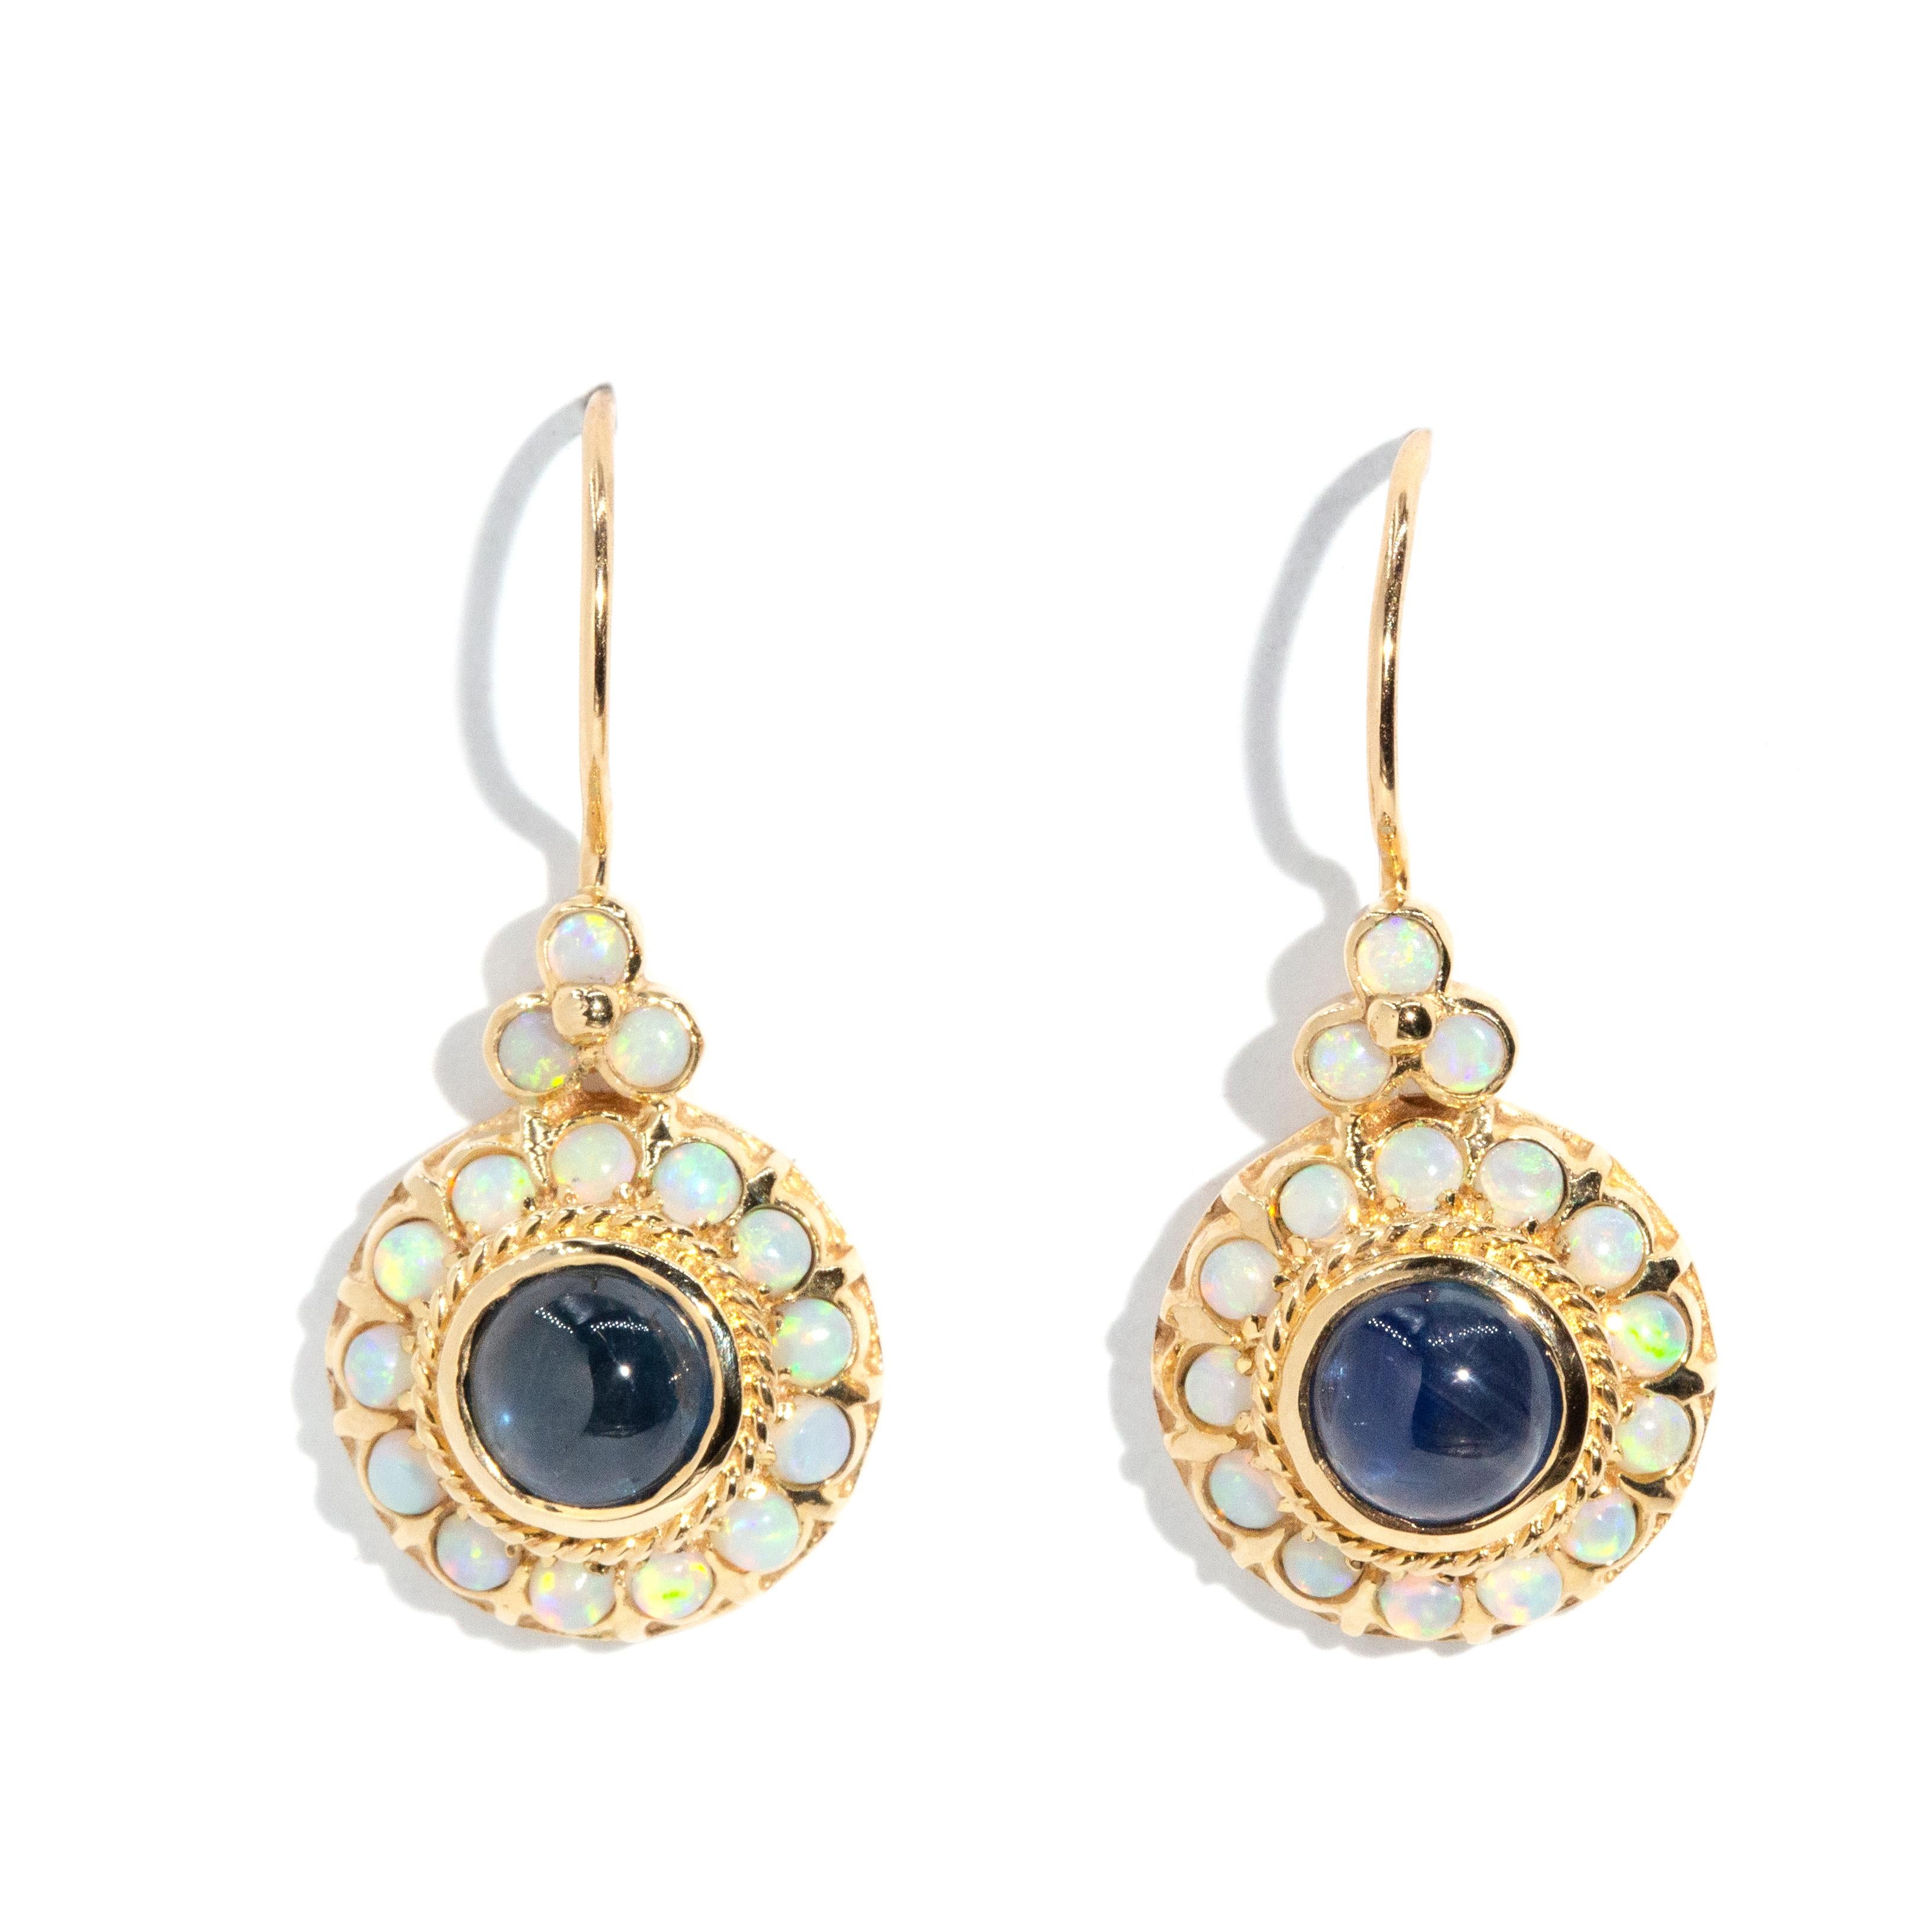 Vintage Inspired Sapphire Cabochon & Opal Drop Earrings 9 Carat Yellow Gold 2